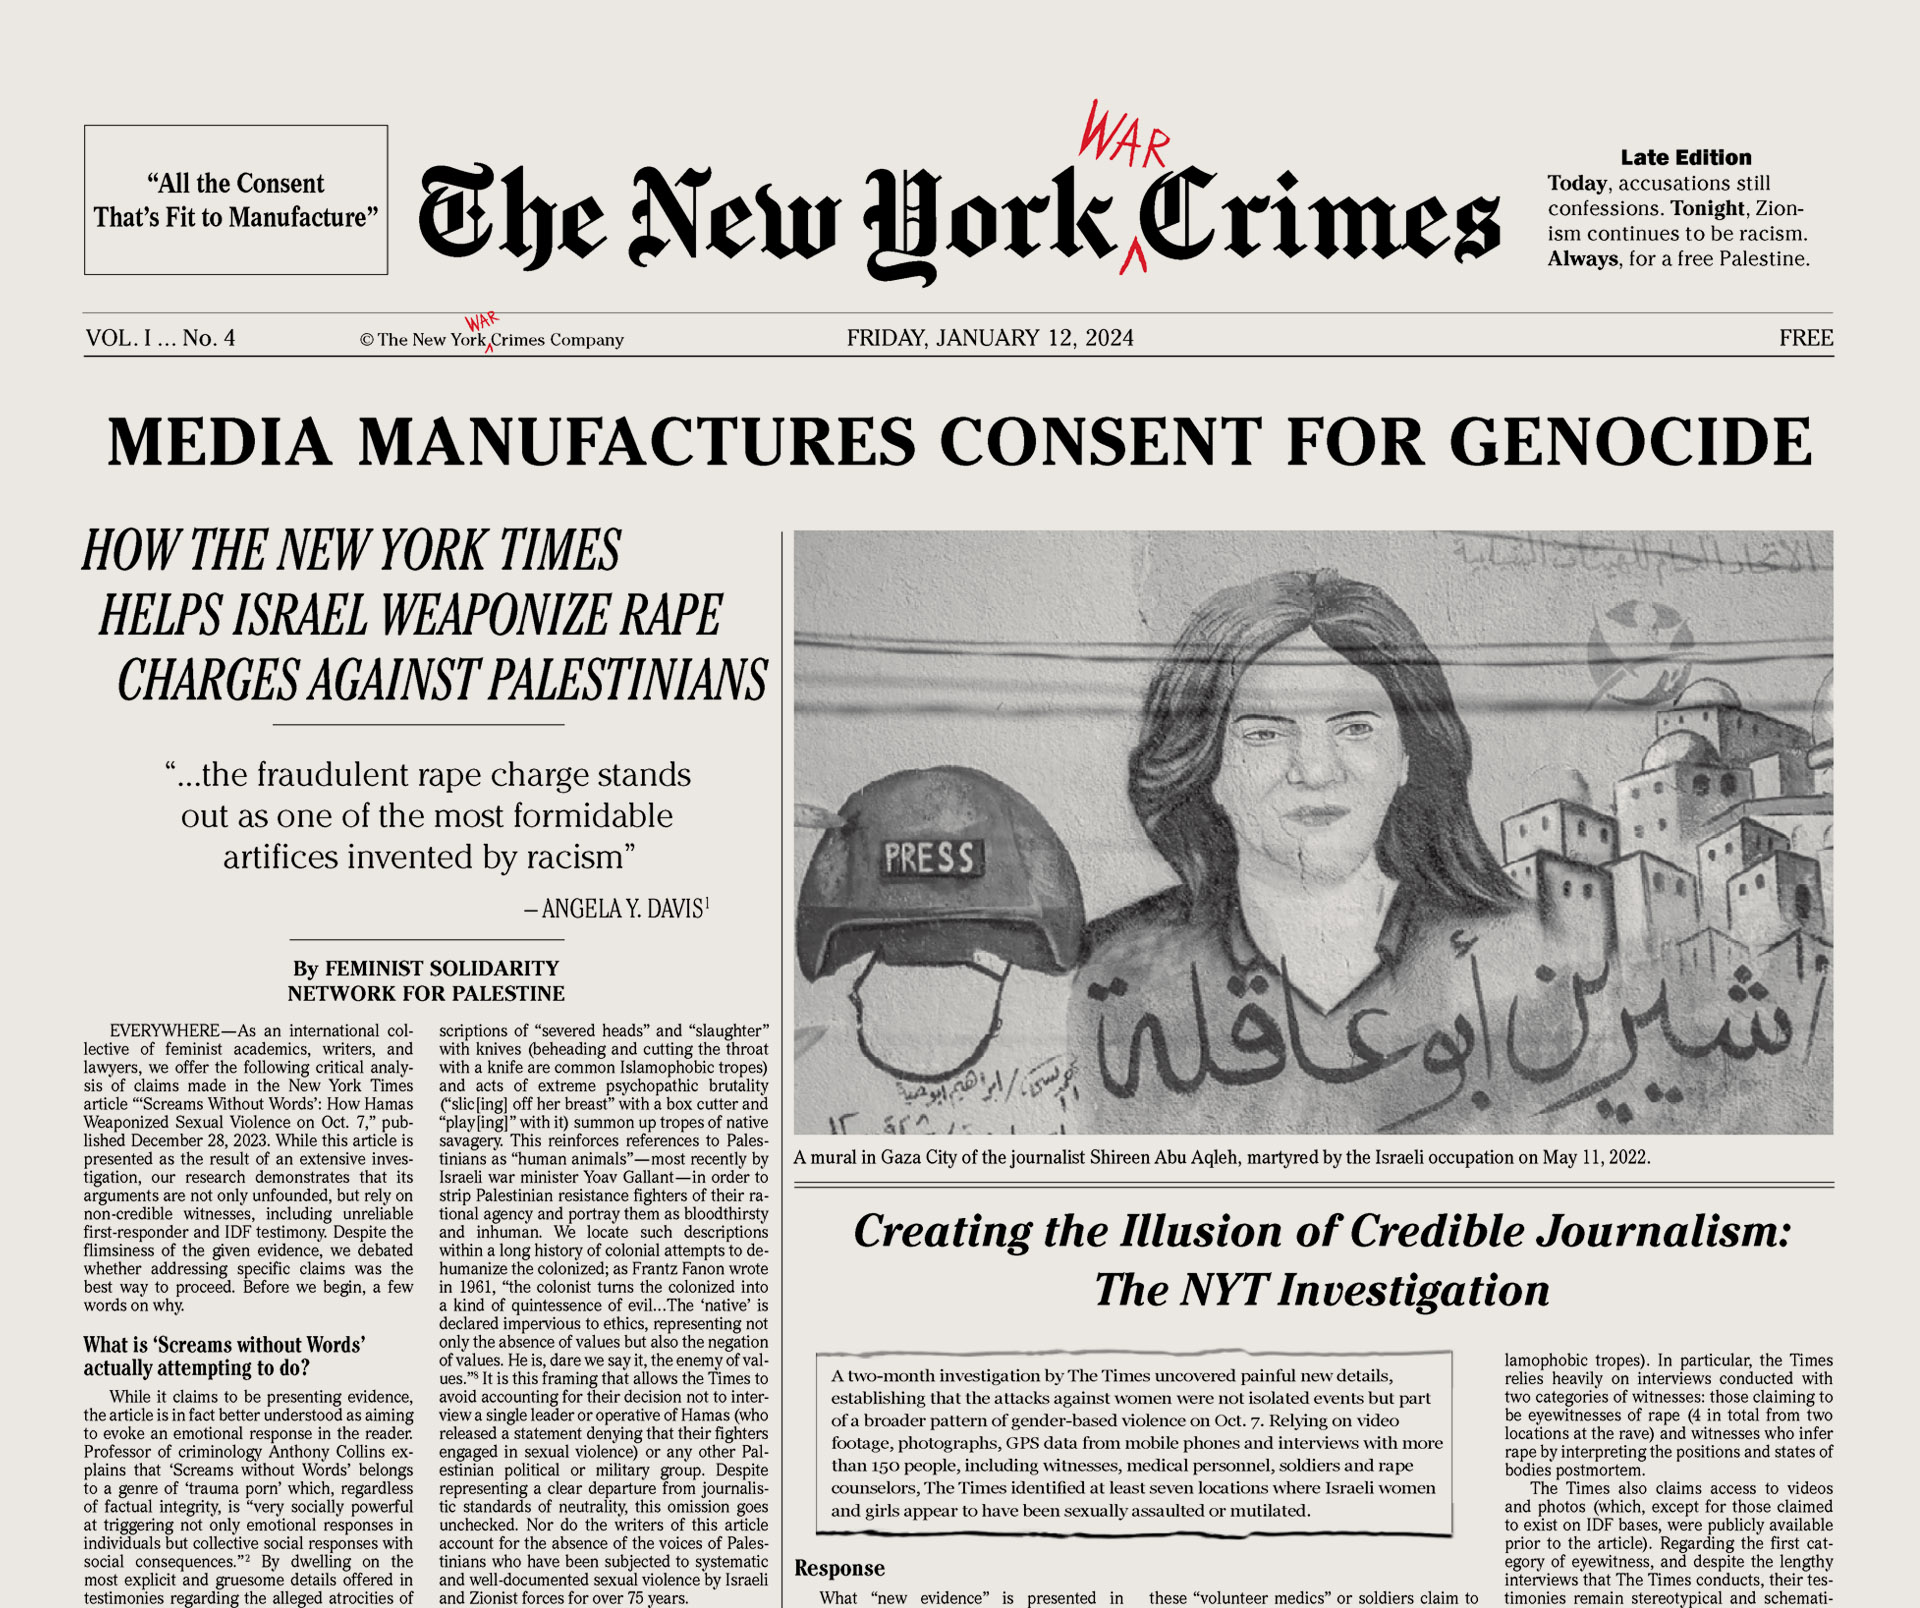 https://newyorkwarcrimes.com/media/pages/print-issue-vol-i-no-4-media-manufactures-consent-for-genocide/f6c0cf753f-1709308326/ny-crimes-04-cover.jpg